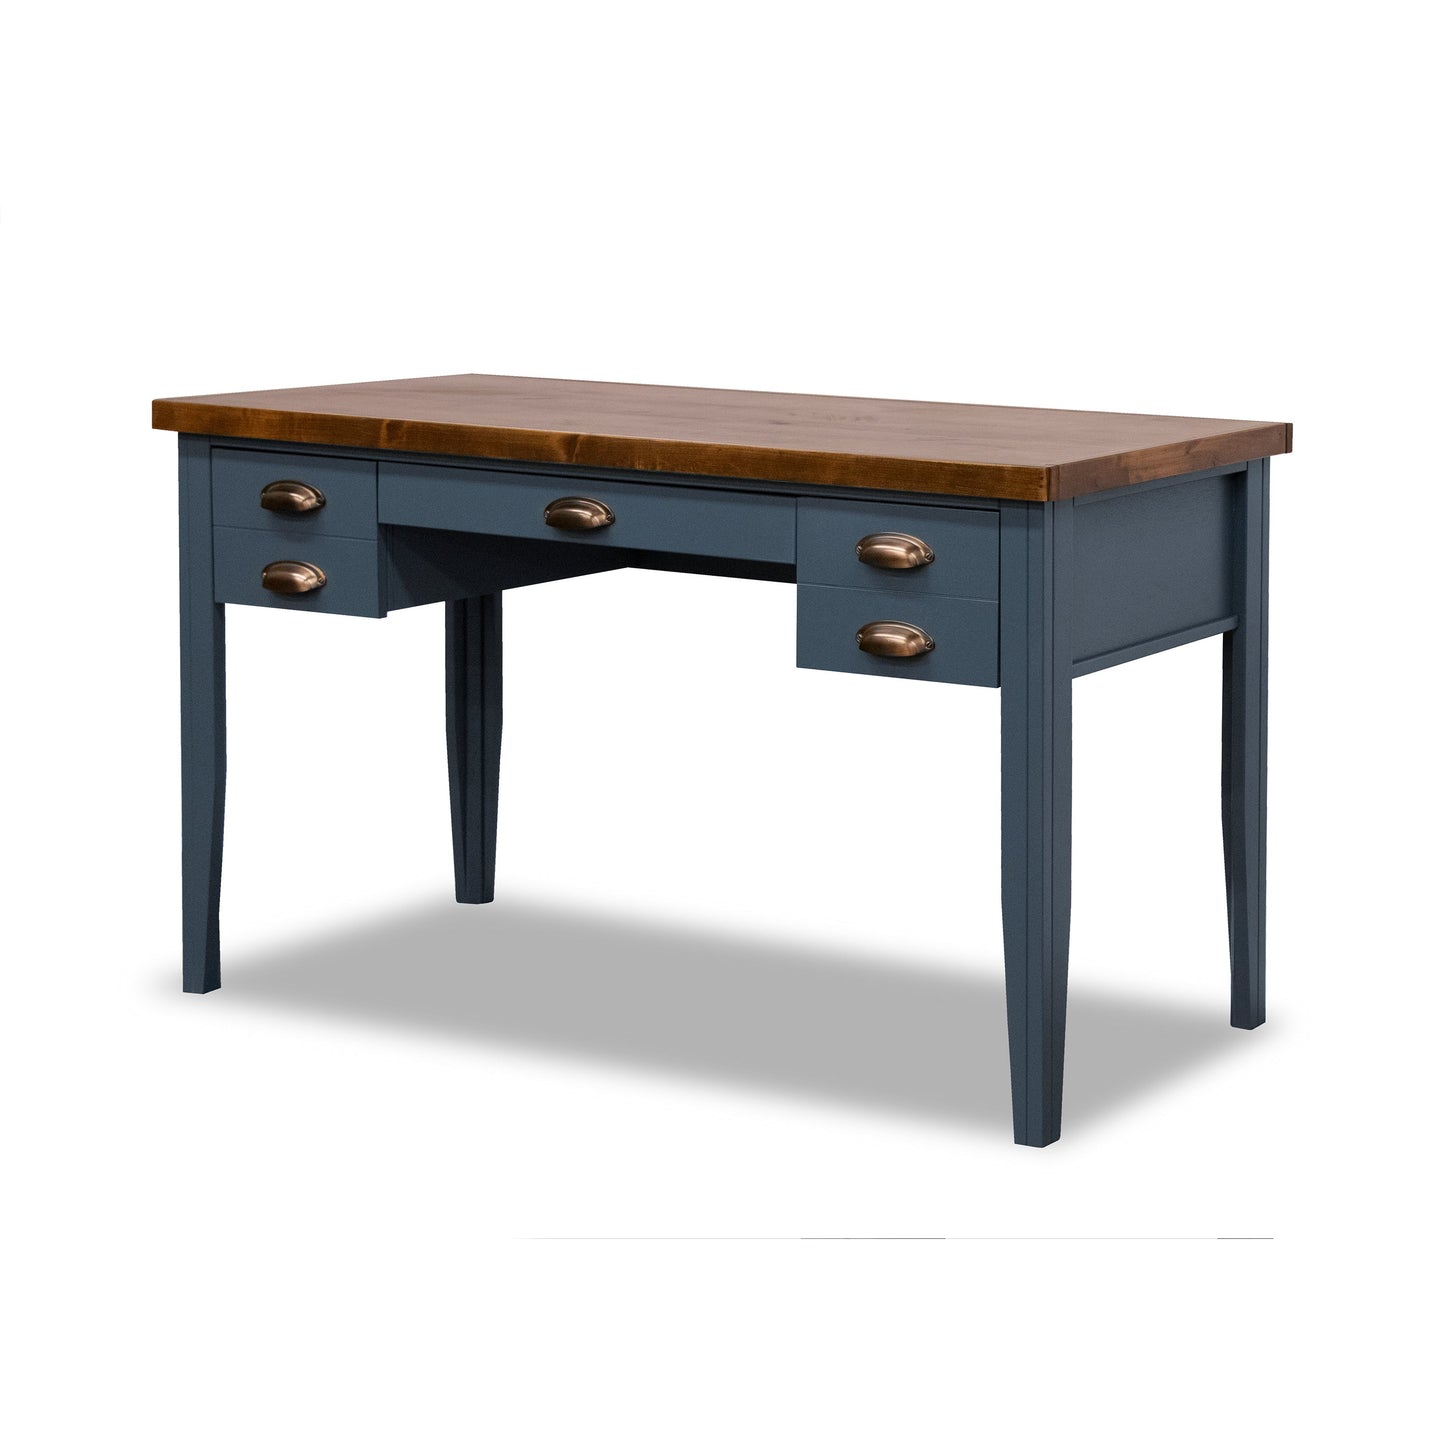 Bridgevine Home Nantucket 53 inch Writing Desk, No Assembly Required, Blue Denim and Whiskey Finish